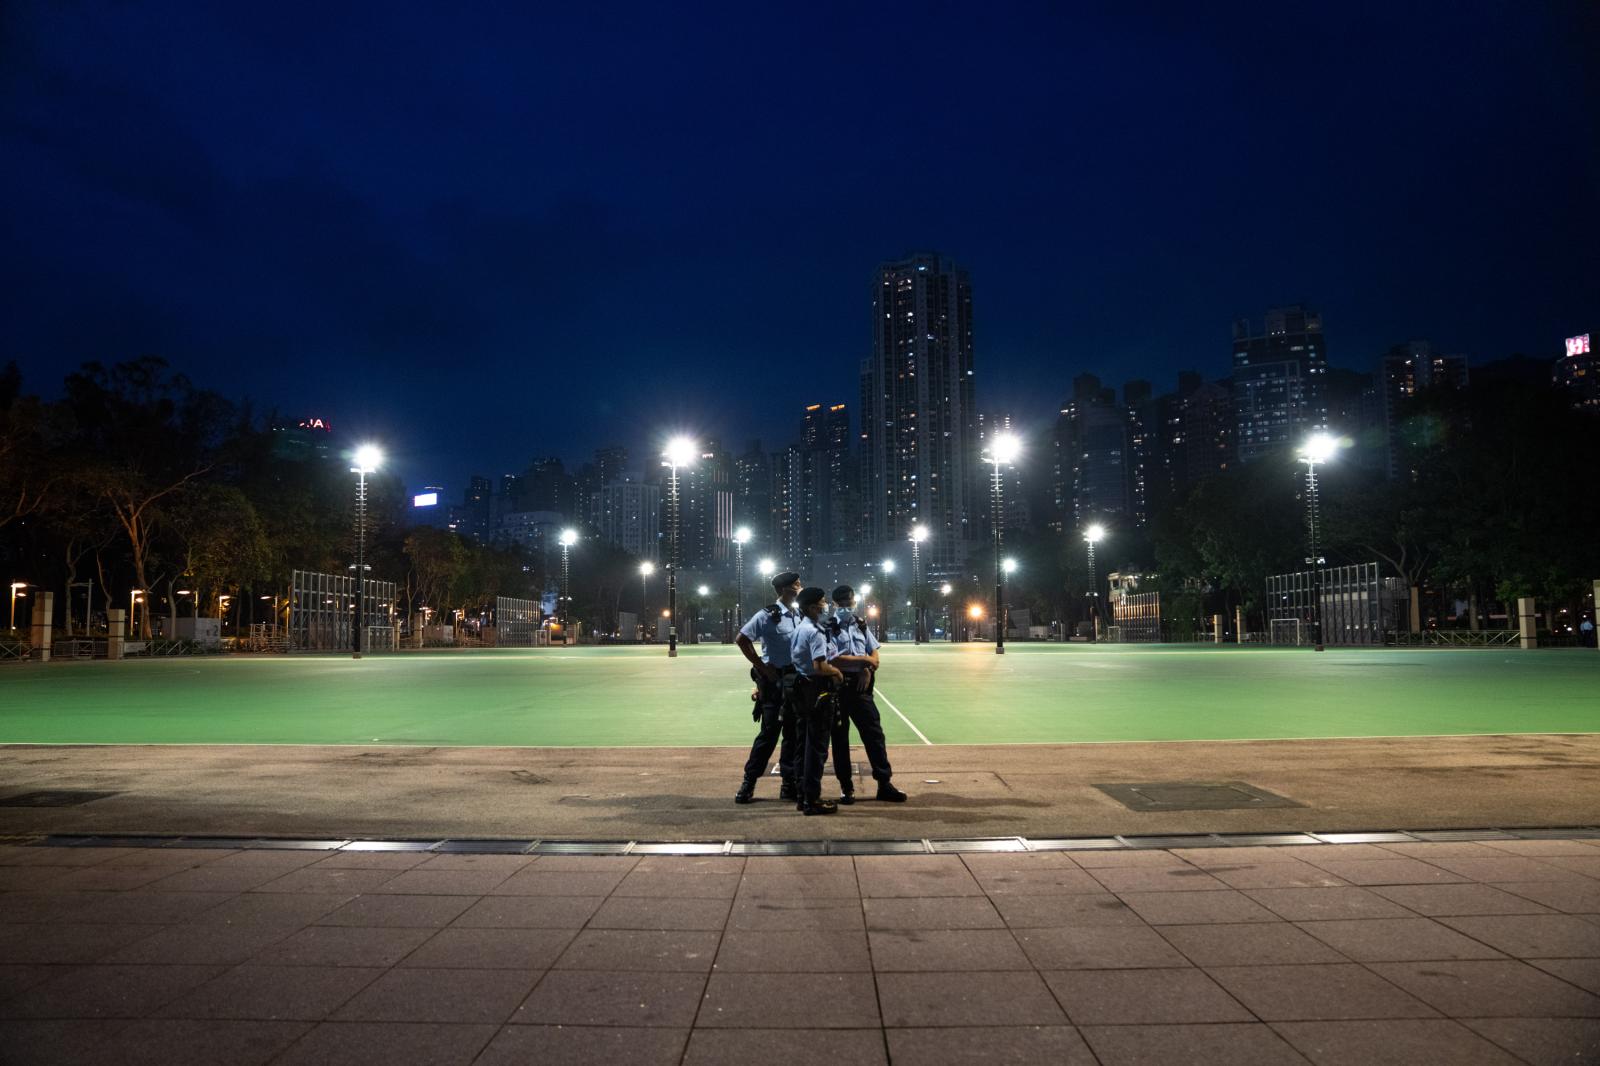 Three police officers huddle together in a blocked off and empty Victoria Park, Hong Kong on June 4, 2021. For the second time since 1989, a Tiananmen Square vigil was banned in Hong Kong, citing concerns of public health safety. Despite Victoria Park (the typical meeting location of the vigil) being closed with 3,000 police officers deployed around the area, Hong Kong people still showed up near the park, with the flashlights on their phones turned on. By the end of the night, at least six people would be arrested and twelve people fined.